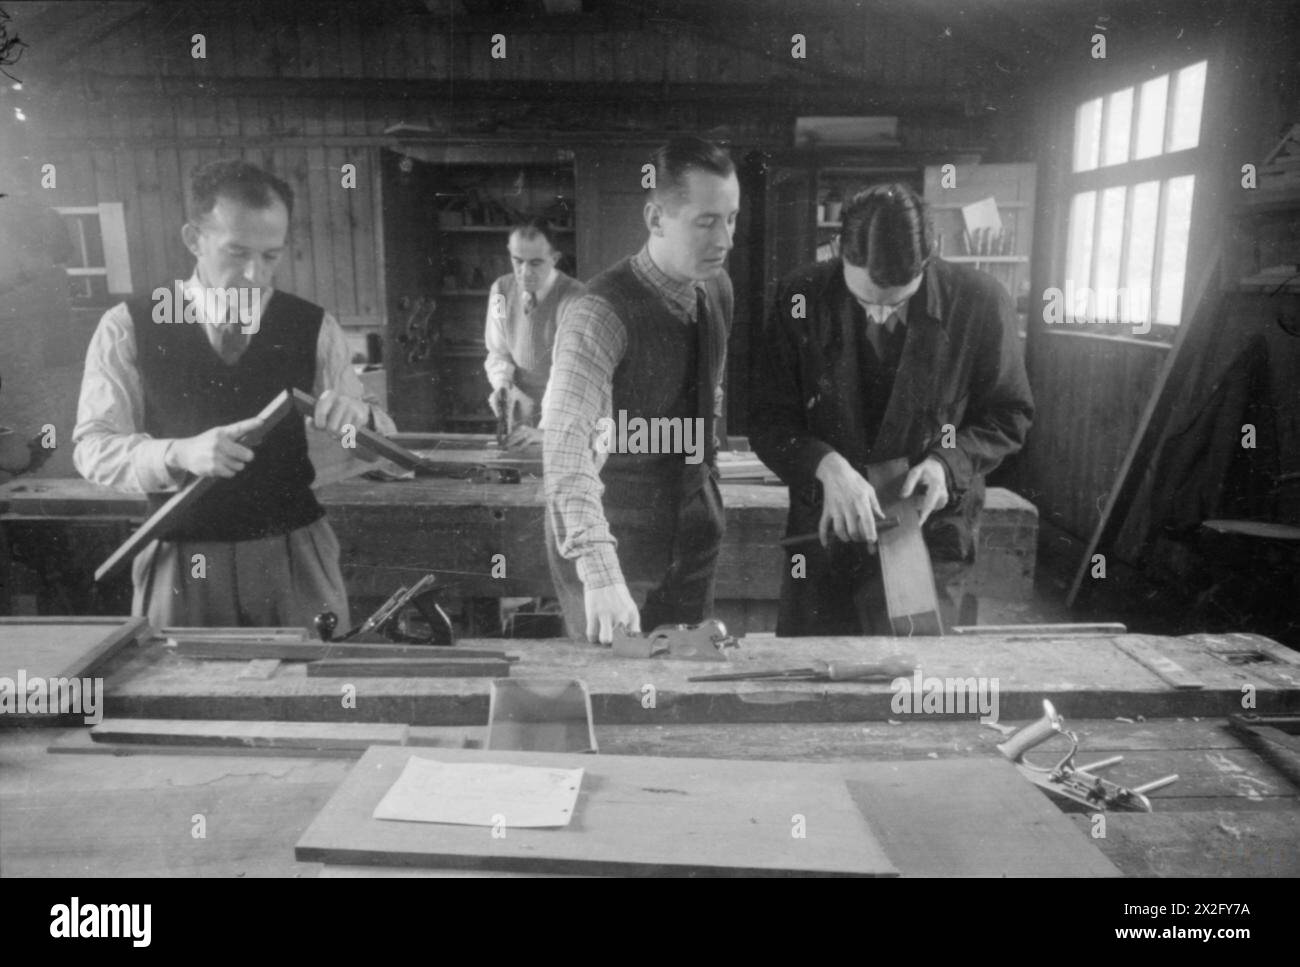 FROM THE SERVICES TO SCHOOLMASTERING: RE-TRAINING AT GOLDSMITH'S COLLEGE, LONDON UNIVERSITY, NOTTINGHAM, ENGLAND, 1944 - Ex-servicemen who are training to be handicraft teachers at Goldsmiths College (based at Nottingham University since the outbreak of war) take part in a lesson on woodwork and bookbinding Stock Photo